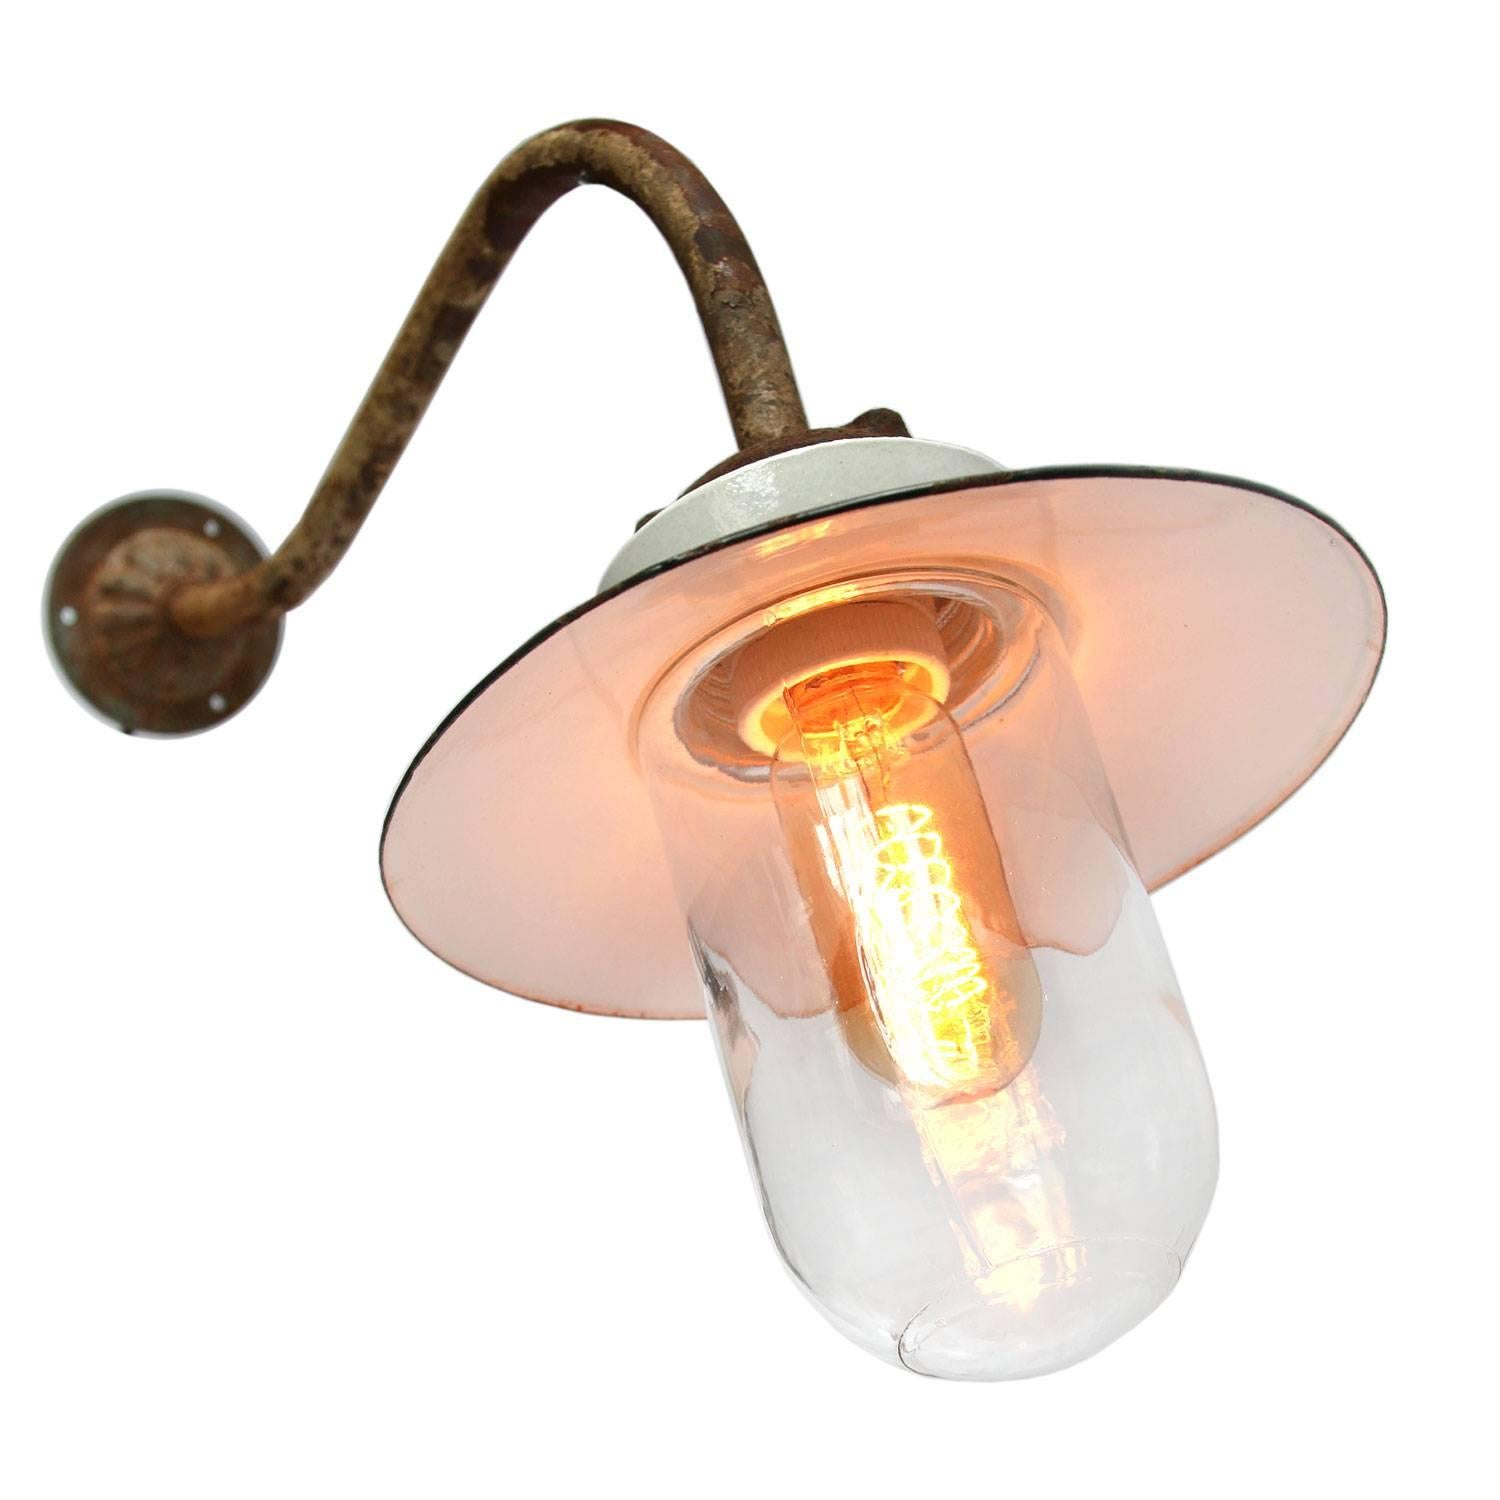 White colored enamel industrial wall light with white interior.
Cast iron and porcelain top. Clear glass. Enamel shade available in multiple colors.
Diameter cast iron wall mount: 9 cm. Three holes to secure.

Weight: 2.1 kg / 4.6 lb

Priced per